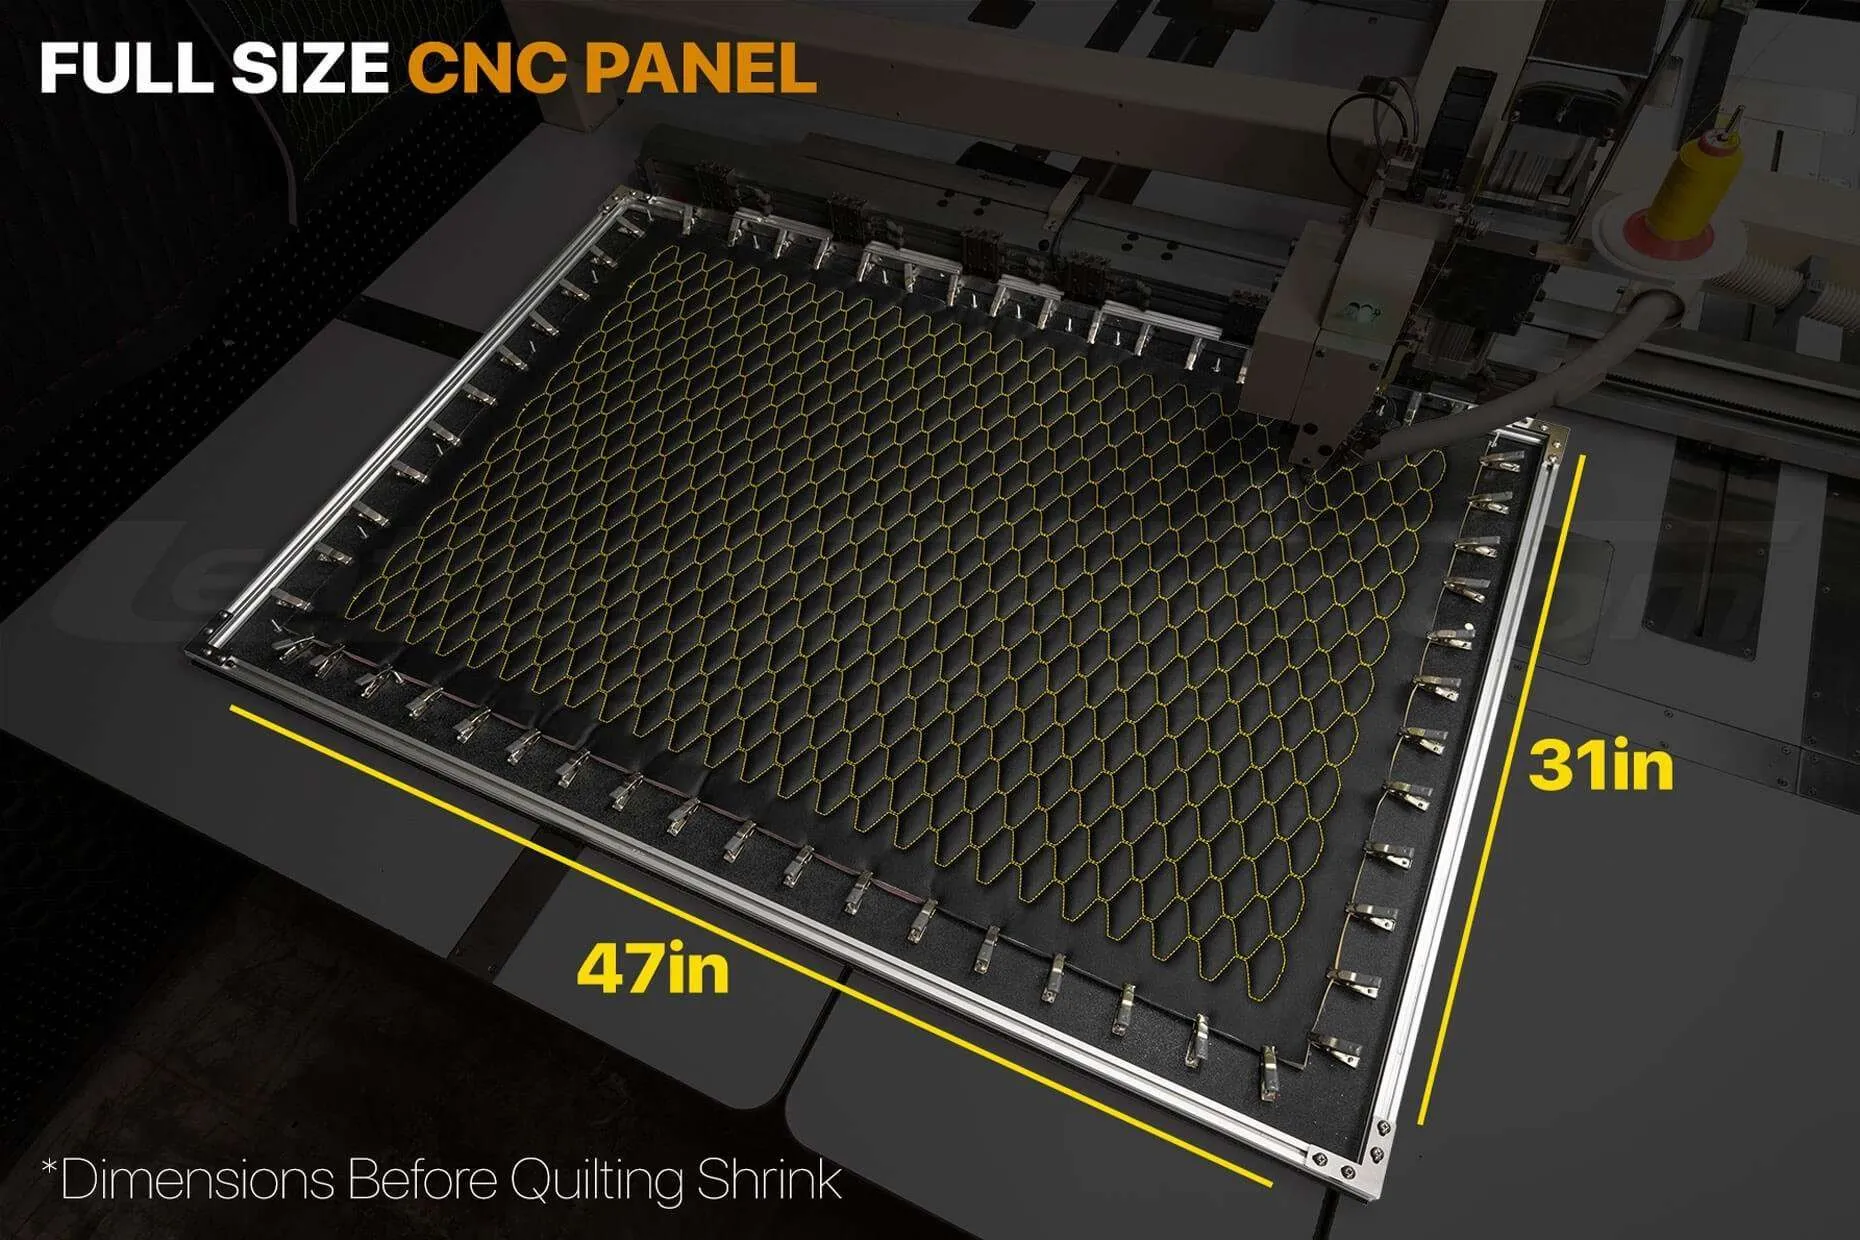 Full Size CNC Panel with dimensions